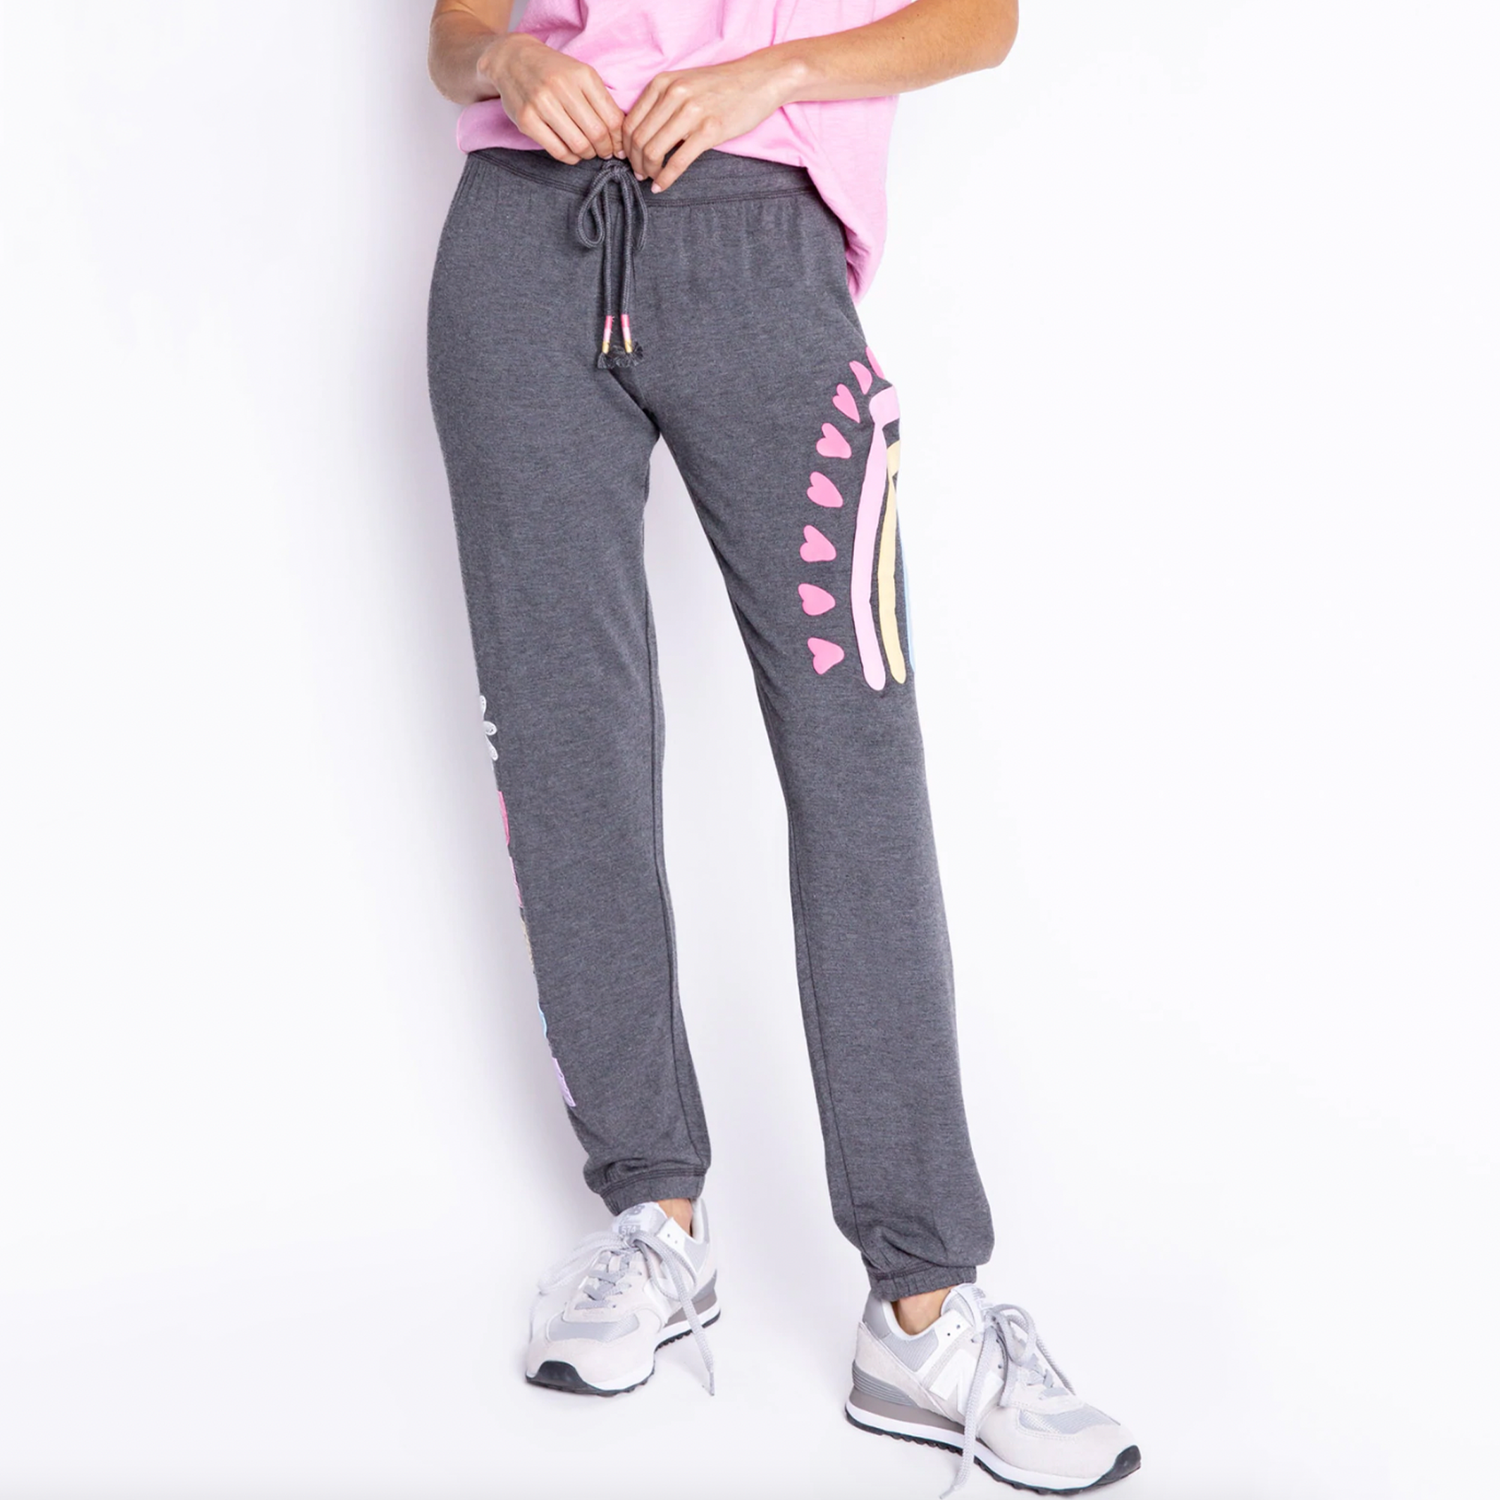 PJ Salvage Peace & Love Banded Pant. Let your good vibes shine! This soft fleece jogger is printed with hearts & peace-signs that make it a statement pant to go with any tee or tank. Designed in the softest fleece, a perfect year-round wear